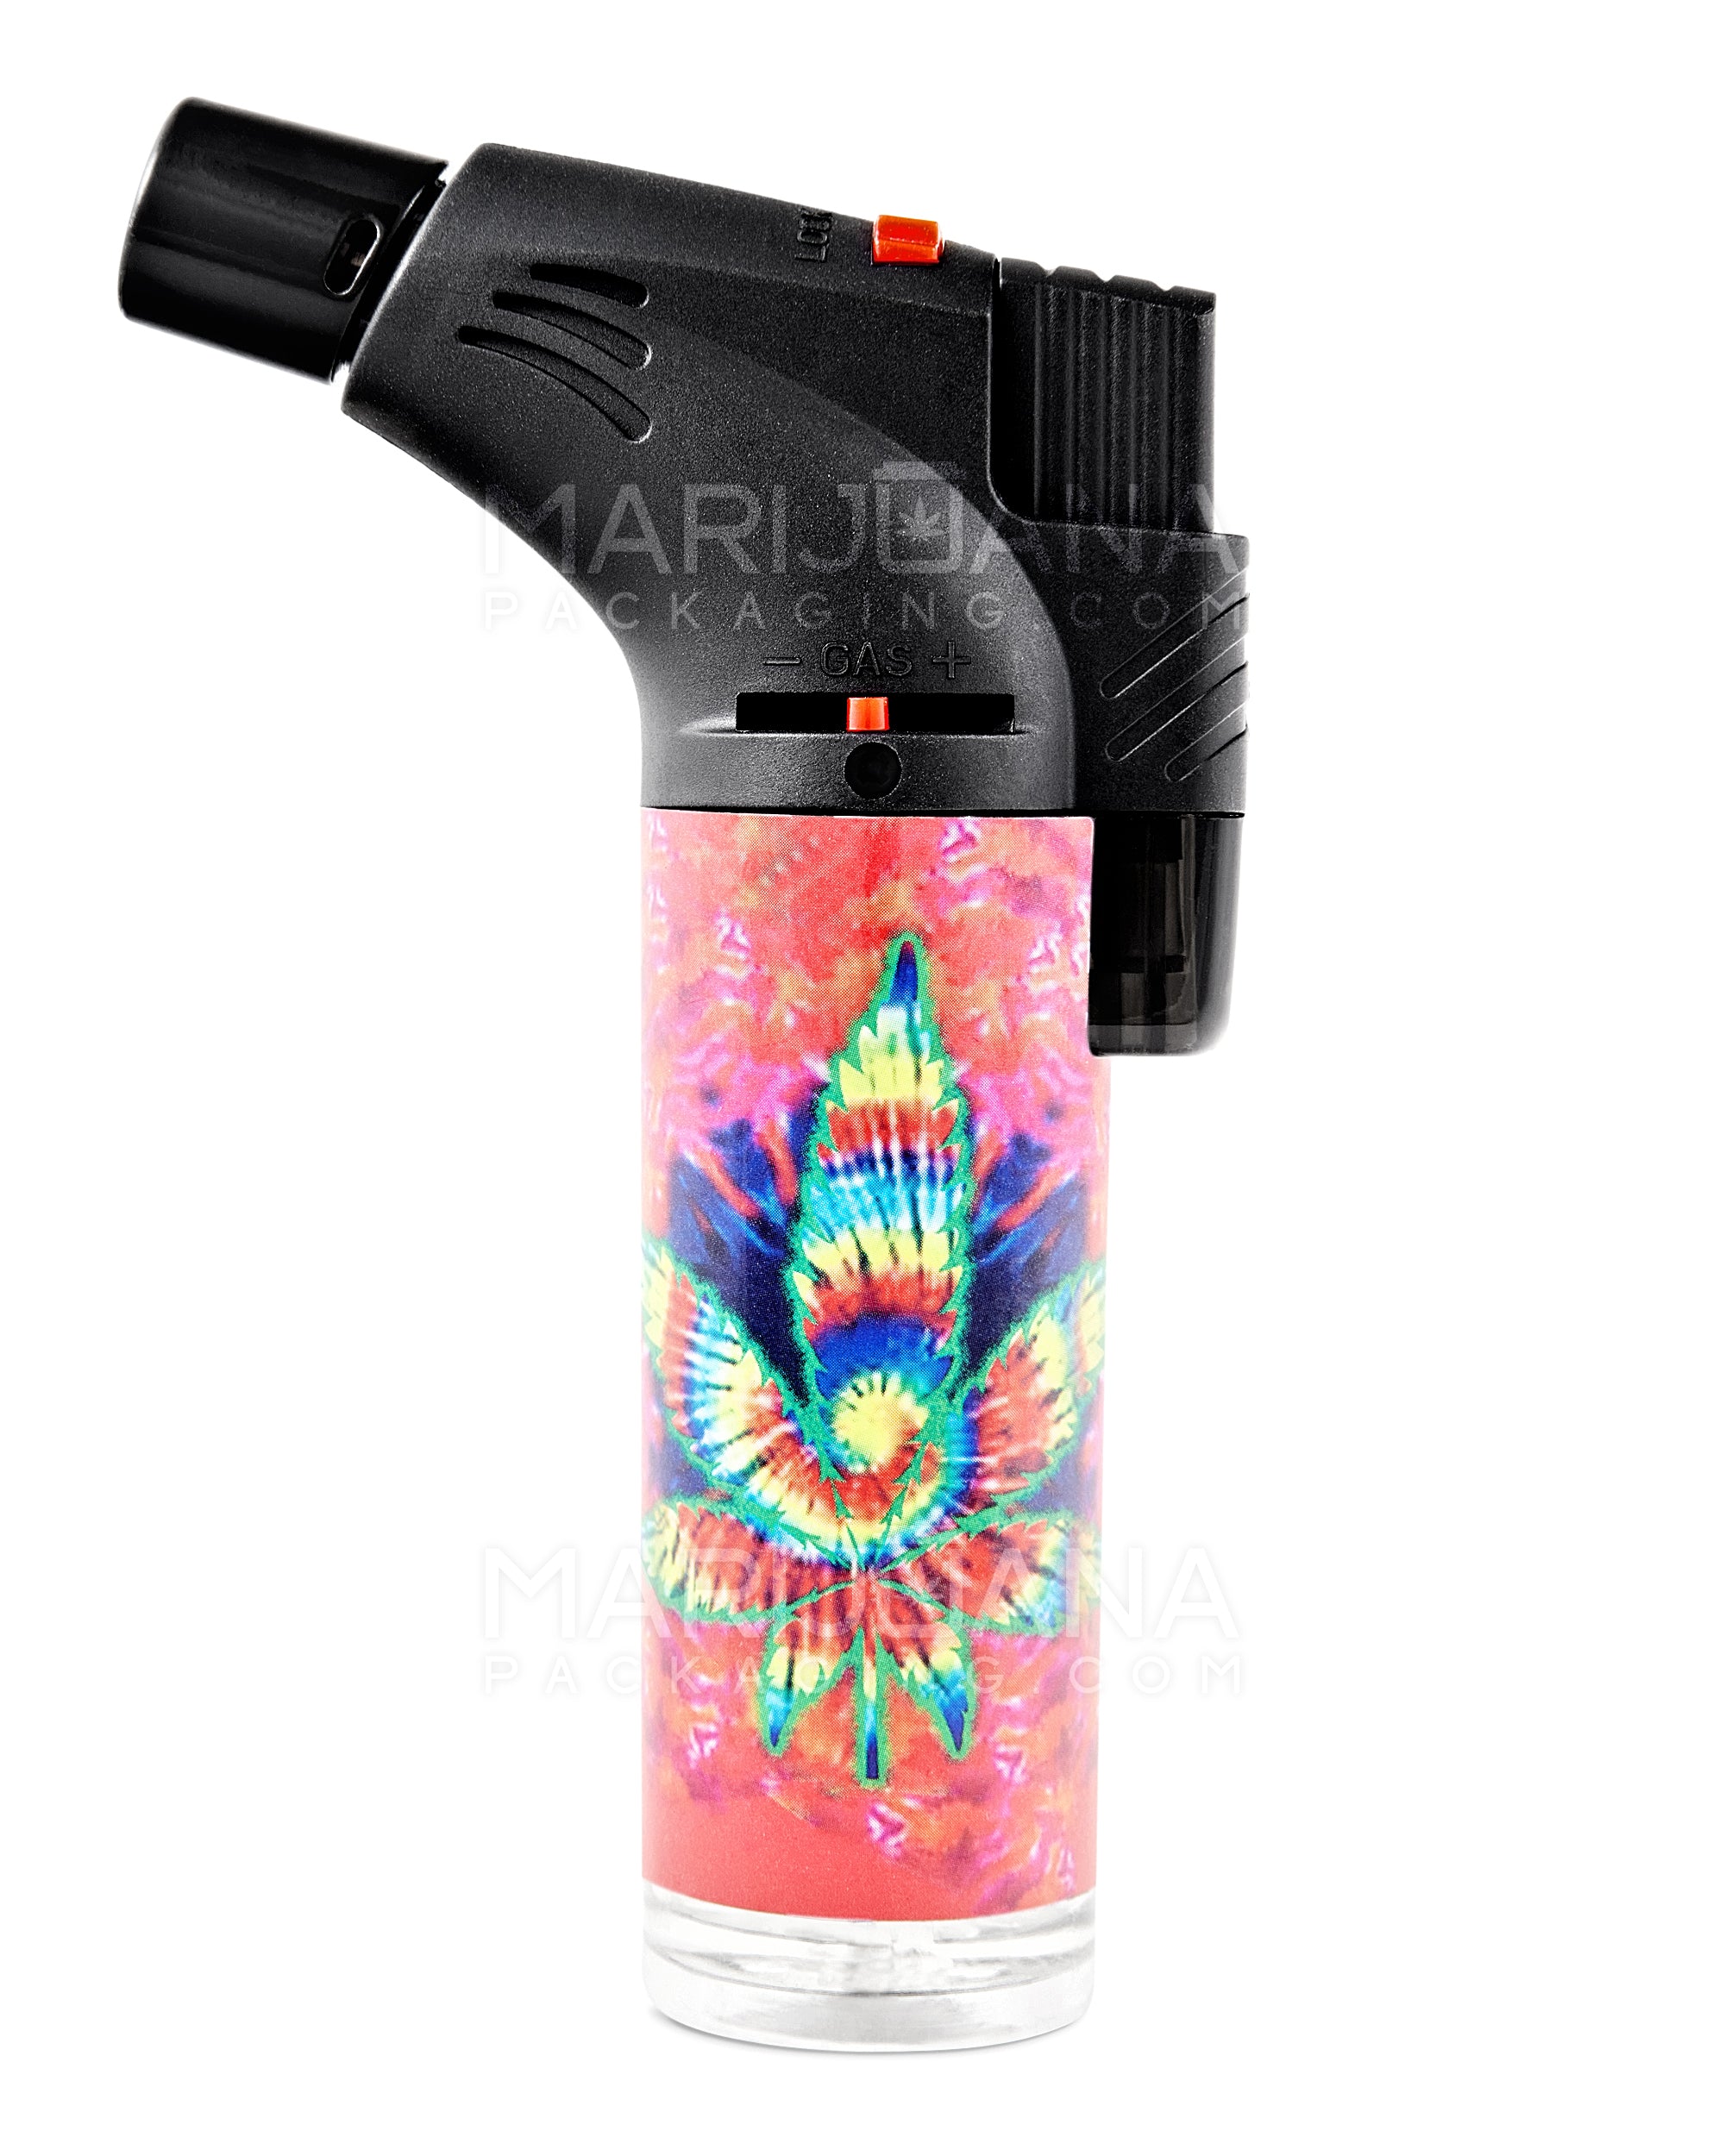 Psychedelic Design Plastic Torch w/ Safety Lock | 4.5in Tall - Butane - Assorted - 7